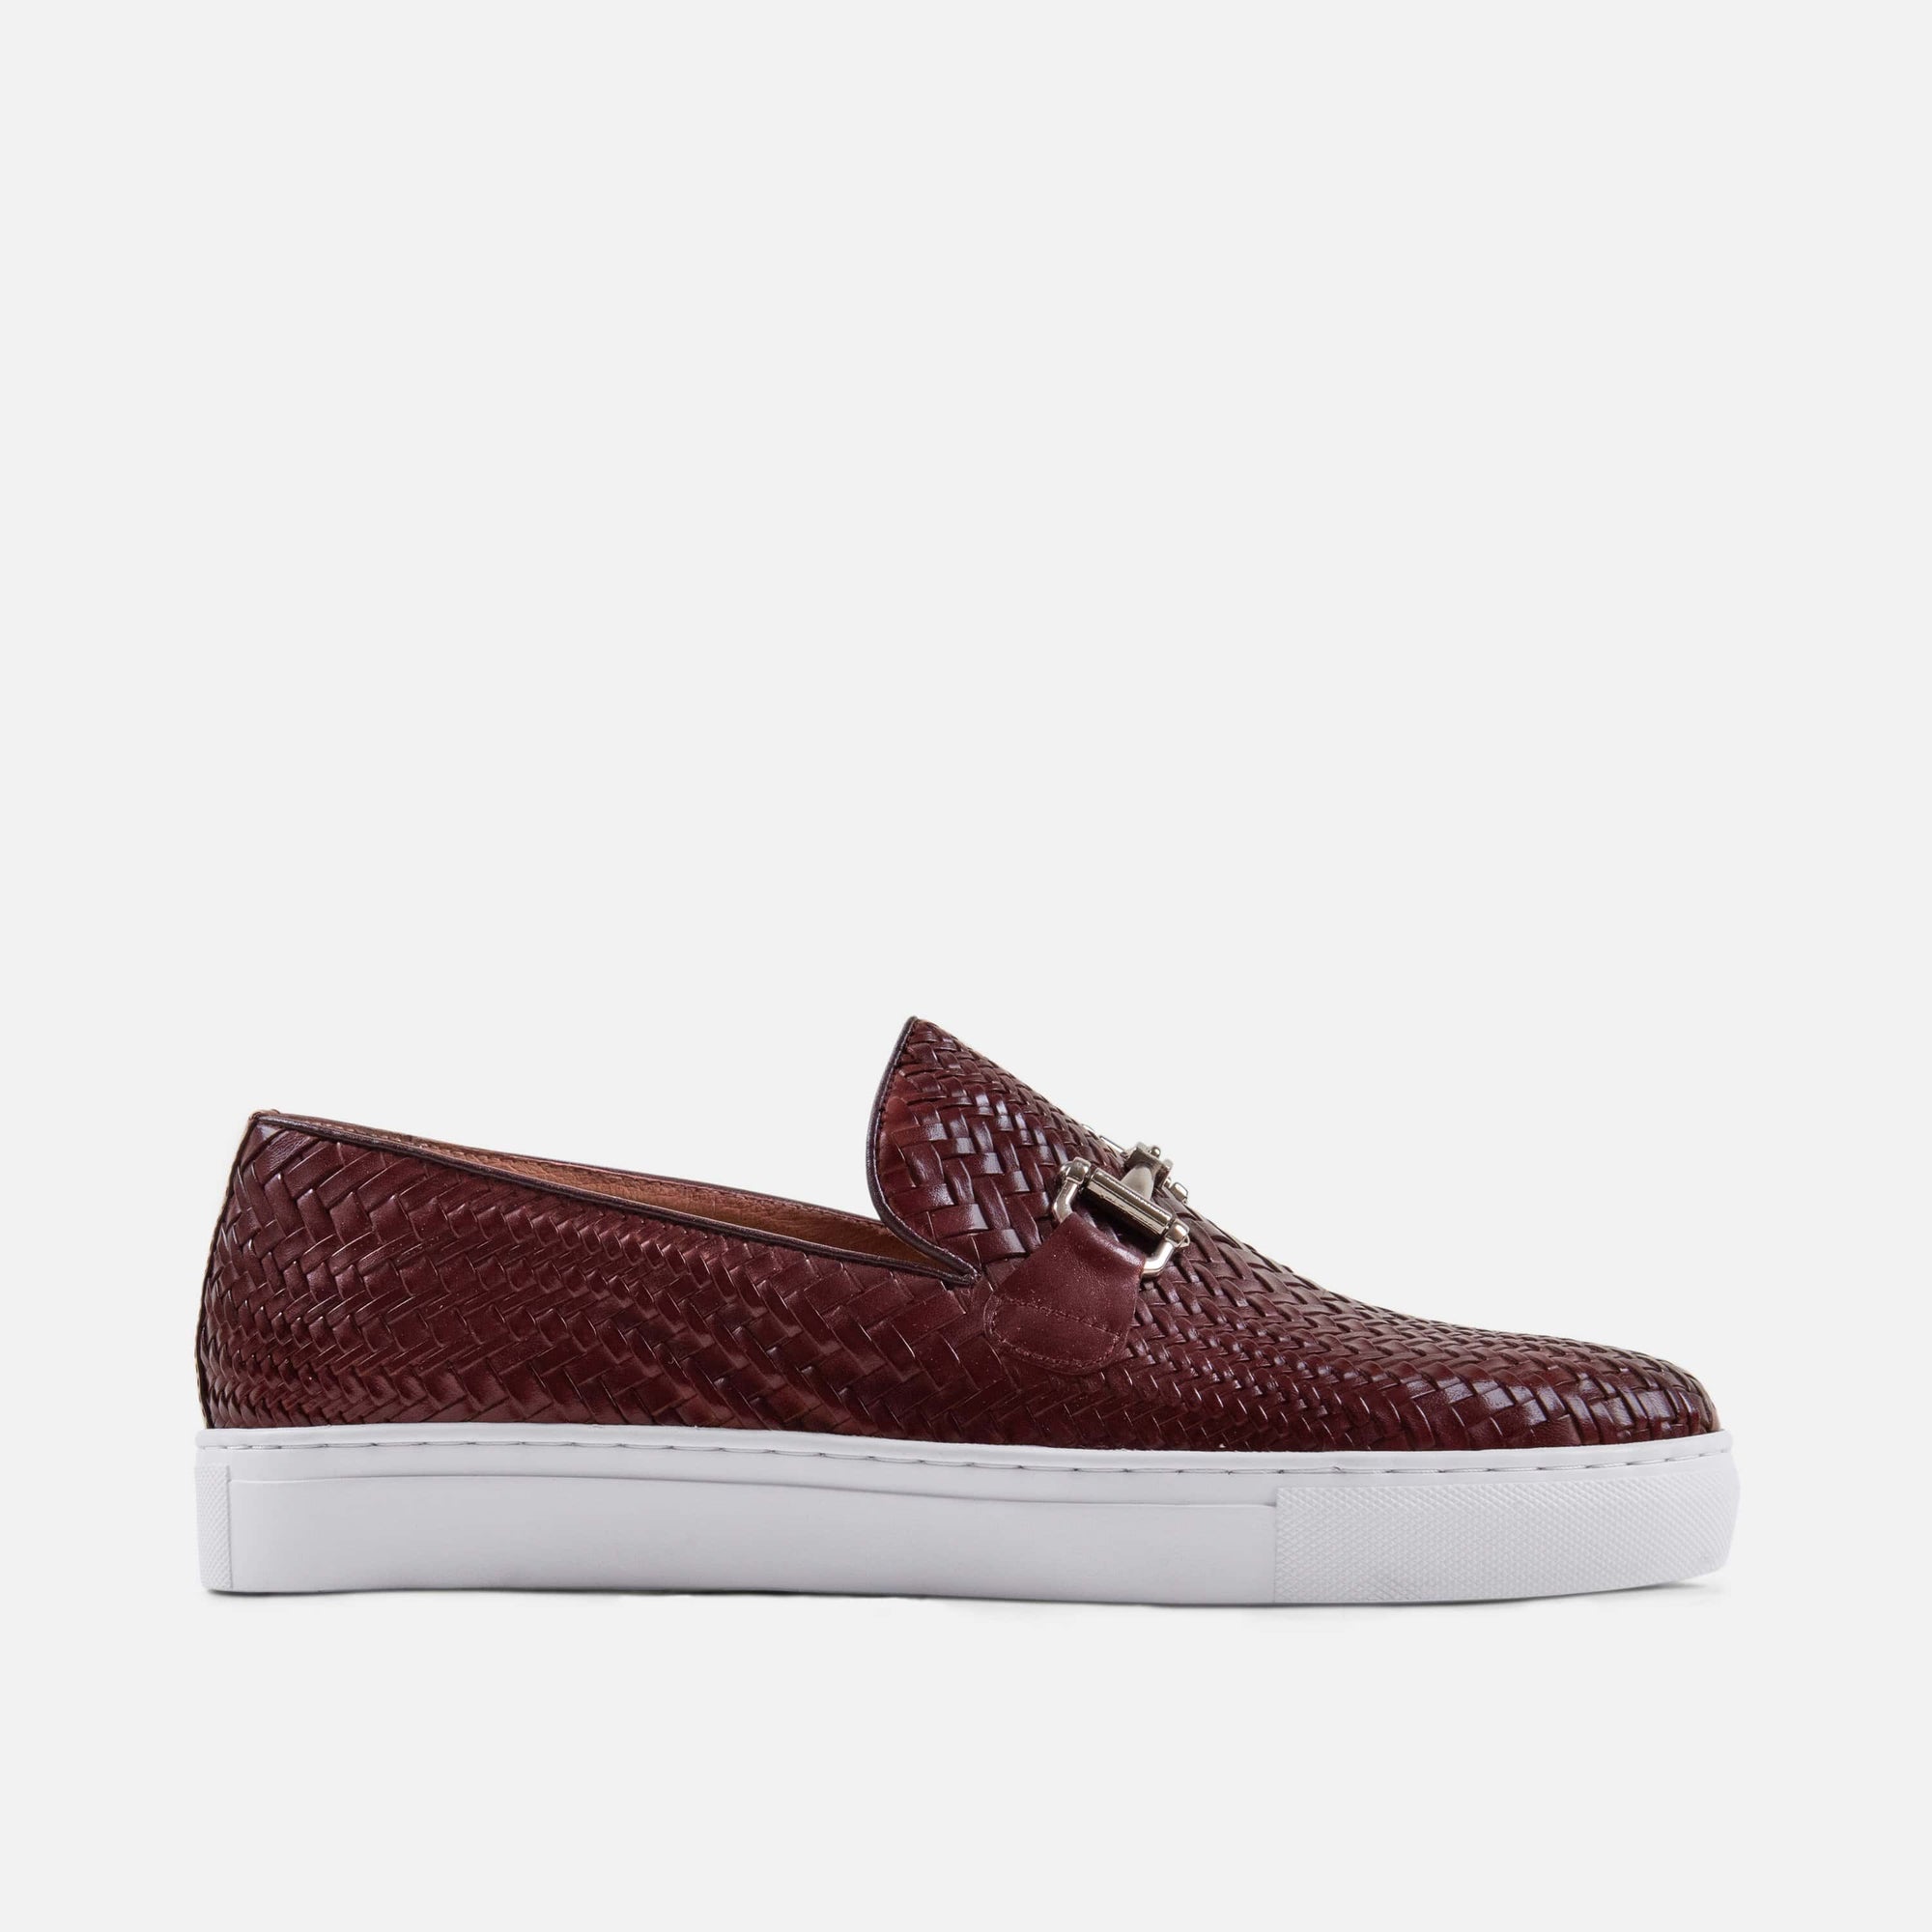 The Sneaker in Woven Brown Leather